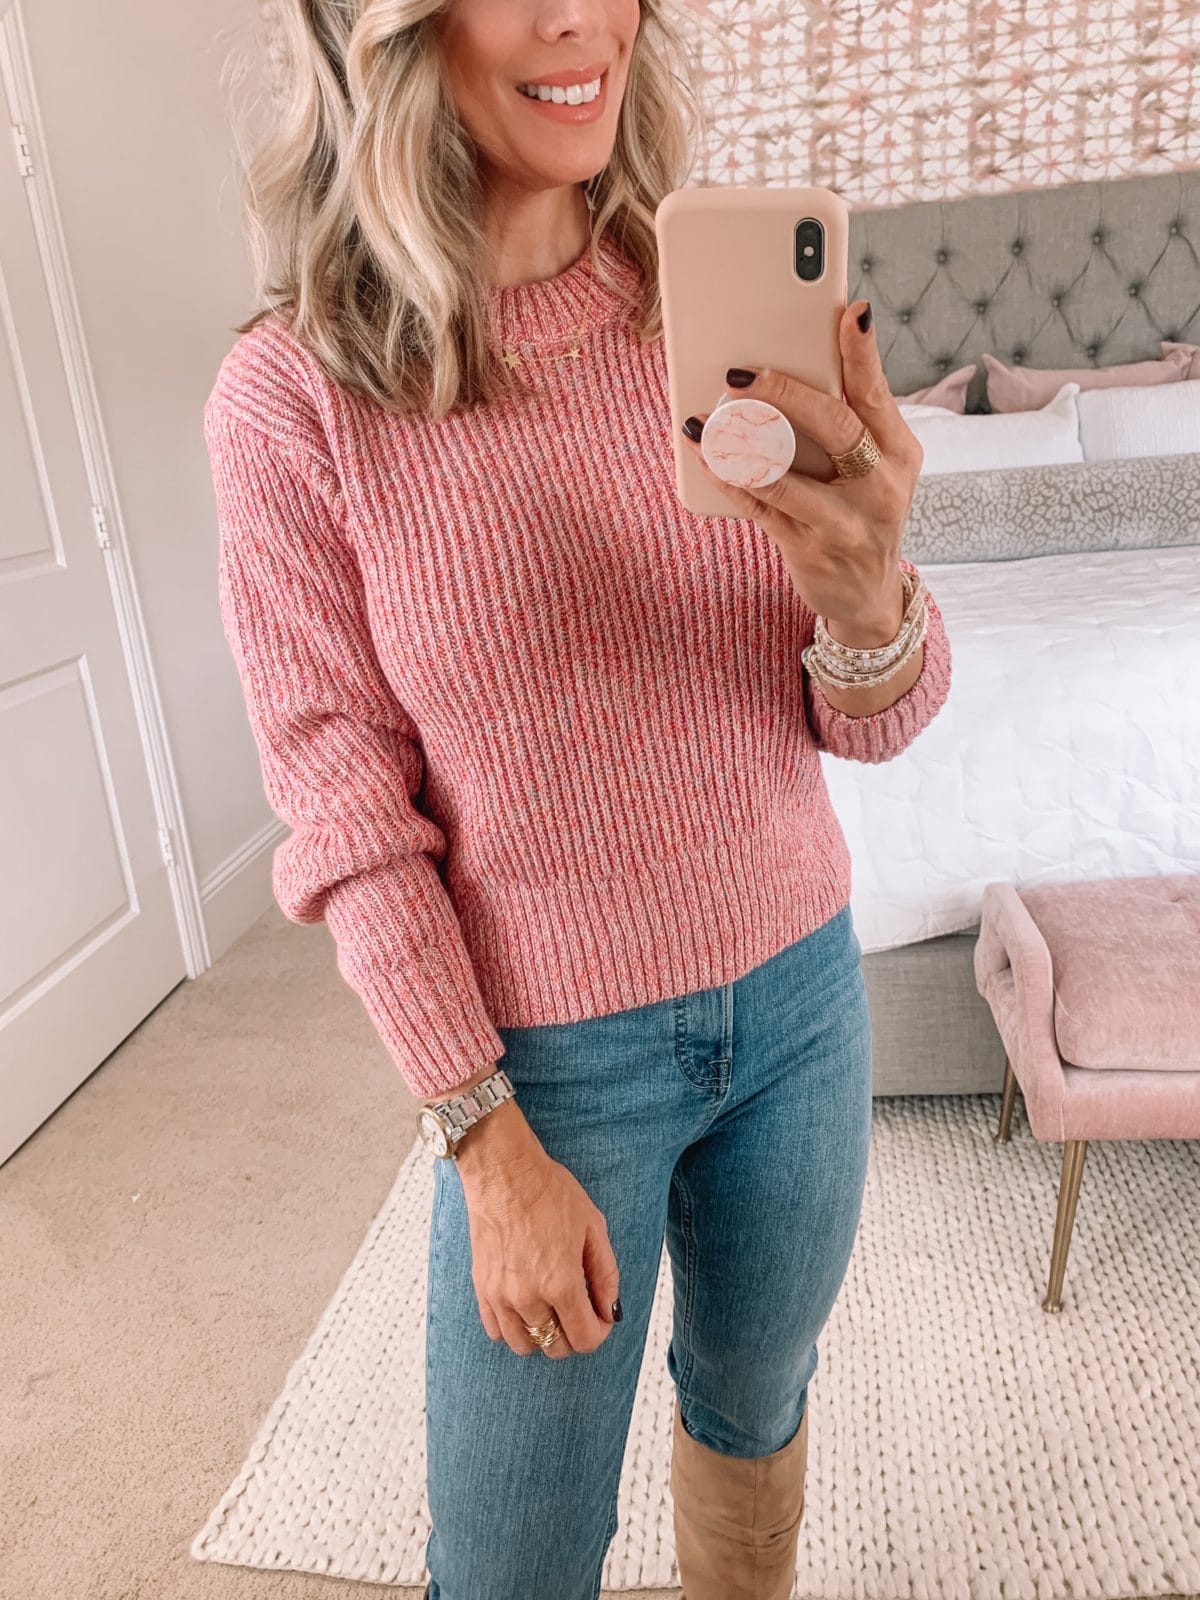 Walmart Fashion, Pink Marled Sweater, Jeans, Boots